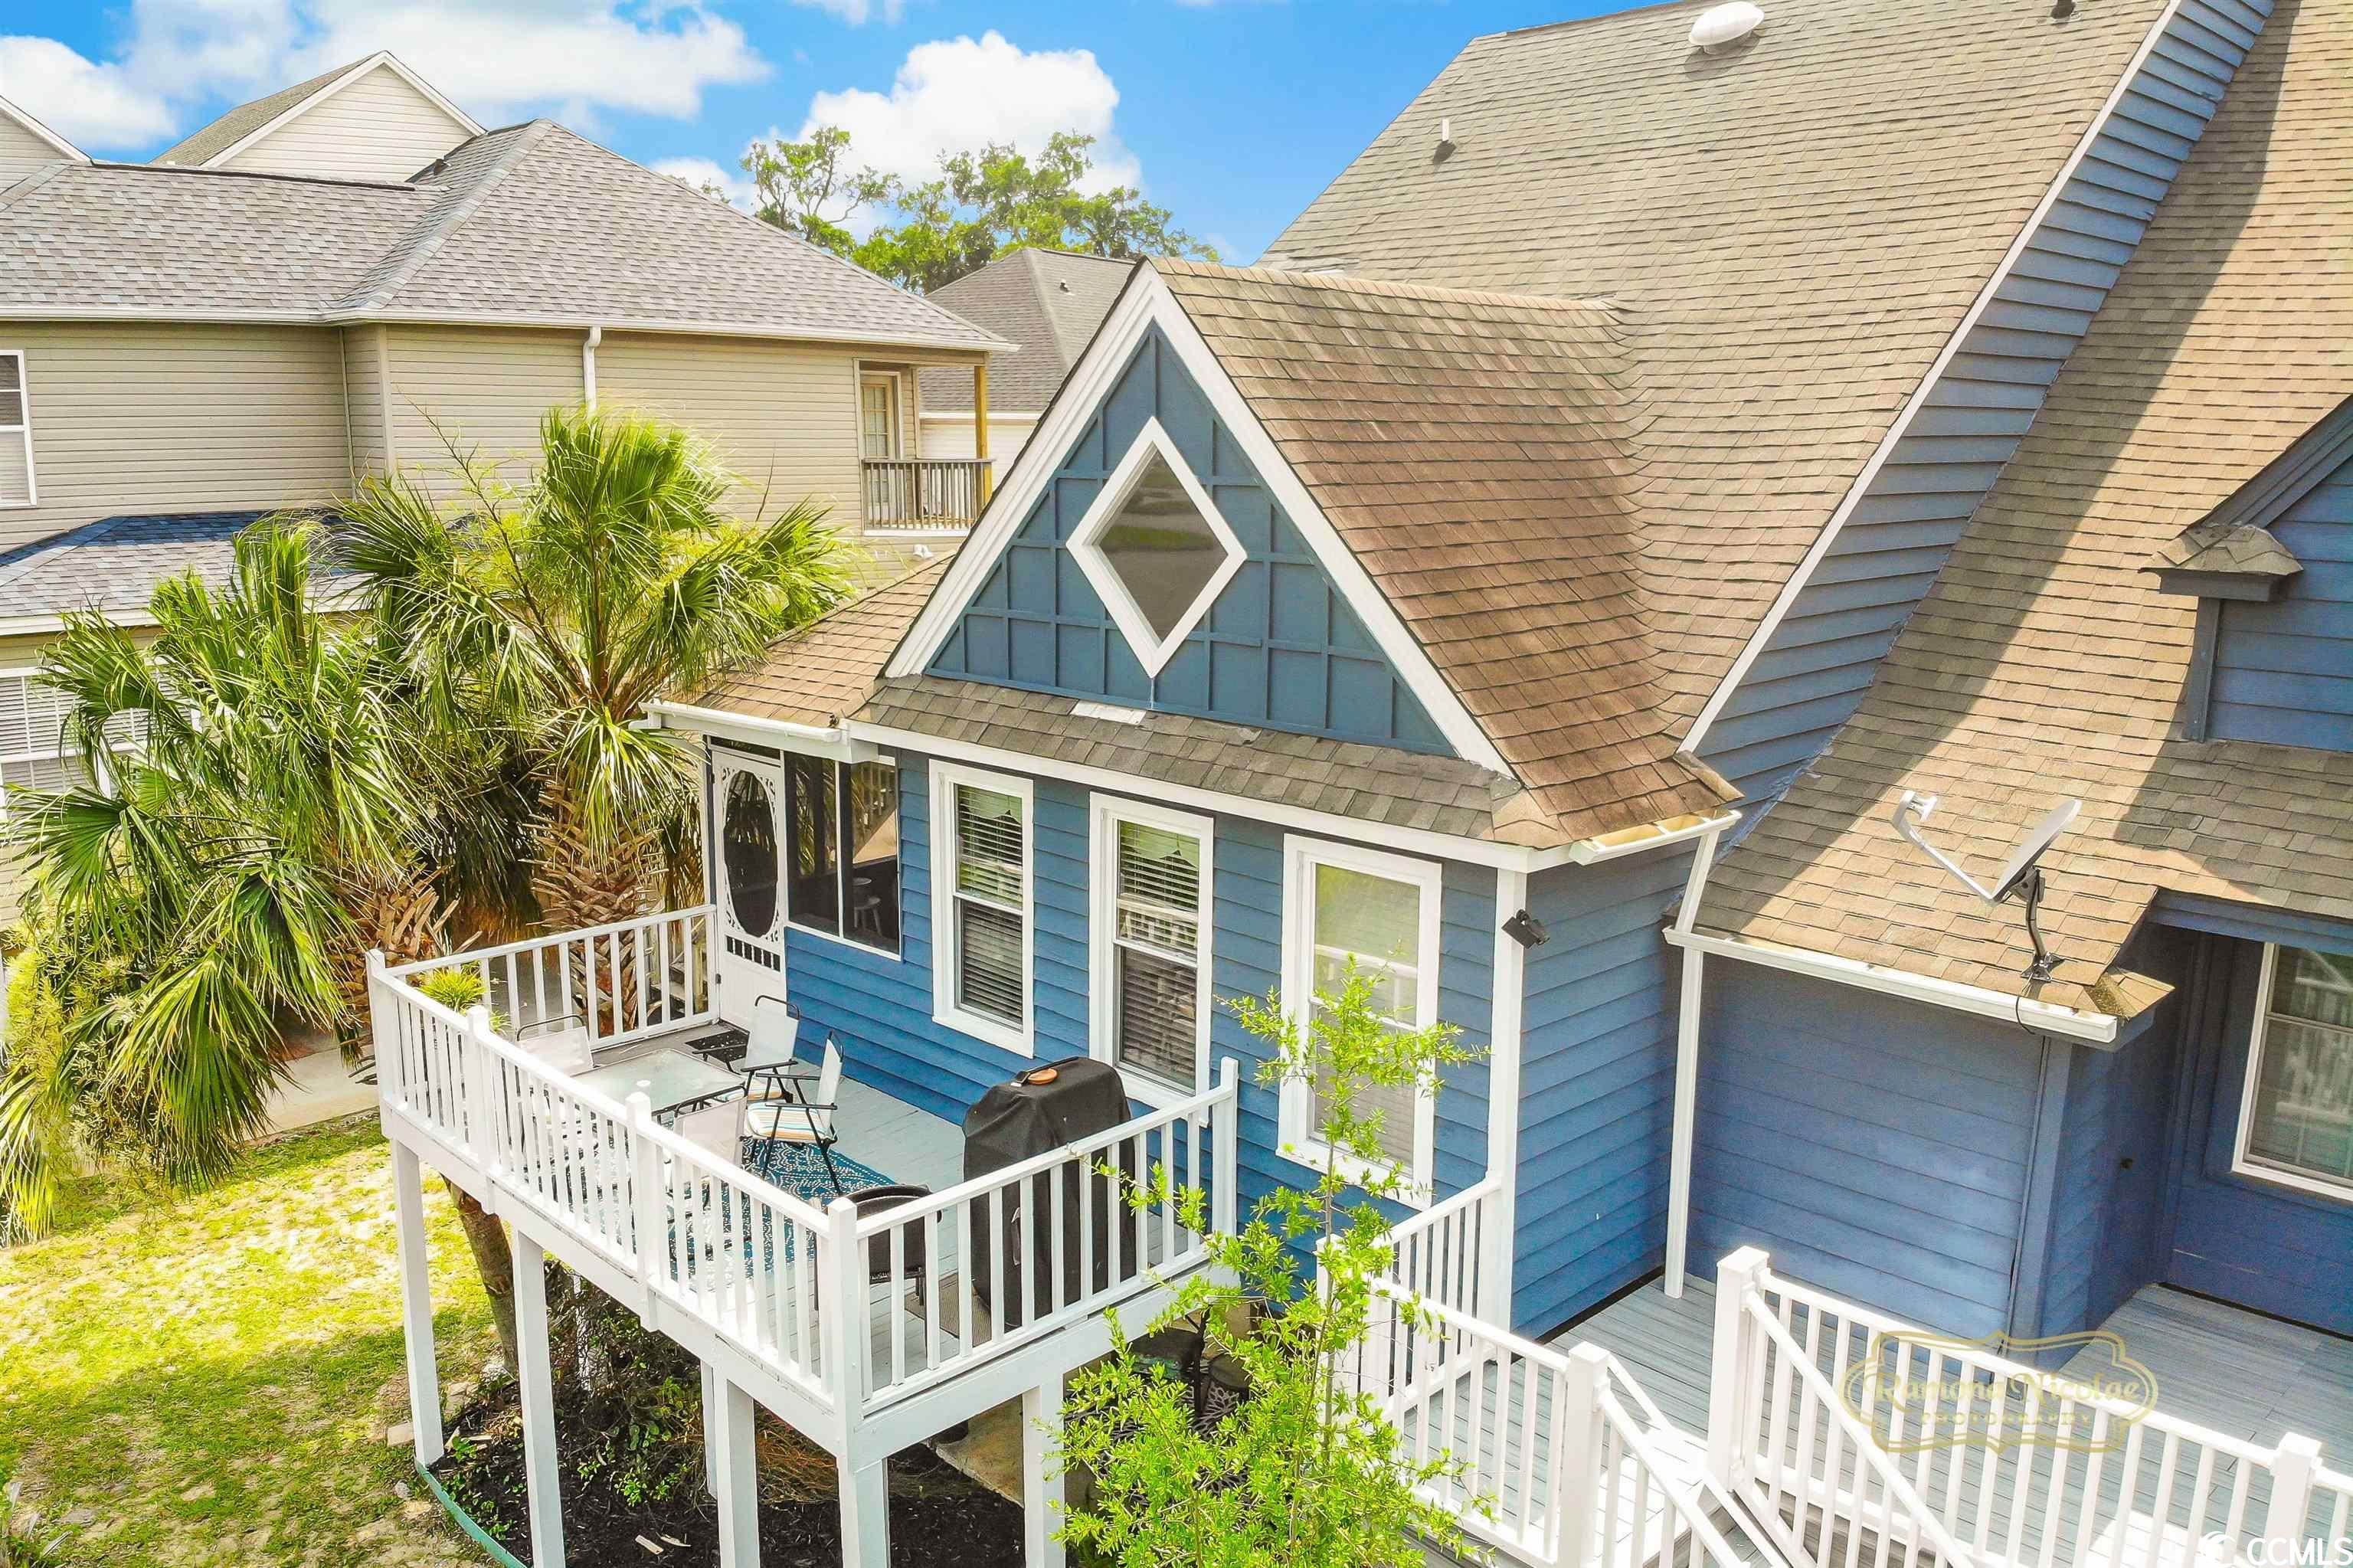 feel the ocean breeze as you're overlooking the marsh and big channel all the way to the ocean from this cherry grove beach town home! raised beach house style. come into the gracious, well maintained living area with vaulted ceilings designed for family and friends to get together for time at the beach. the large open kitchen features a breakfast bar, and so much cabinet space to make any cook happy.  the open living area opens to the carolina room with lots of natural light,  shaded by palms, panoramic direct marsh and inlet views stretching to the ocean. the large open deck is the perfect place to grill outside, feel the fresh salt air, and relax watching pelicans fly and catch fish. enjoy the beautiful pool before or after beach time! outside shower, too.full size washer and dryer, large closets, covered parking for your cars and golf cart, exterior storage for your beach chairs and fishing gear. the atlantic ocean along the south carolina coastline is a few blocks away! take a walk, ride your bicycle, or golf cart through the heart of cherry grove beach in north myrtle beach, sc. this great property is the beach house, primary home, second home, or investment you're looking for.  minutes to world class shopping, dining offering succulent fresh seafood, amusements, nightlife, live entertainment, theaters, marinas, nature parks, deep sea fishing, boating, watersports, sports complex, everything the grand strand and myrtle beach area offer!